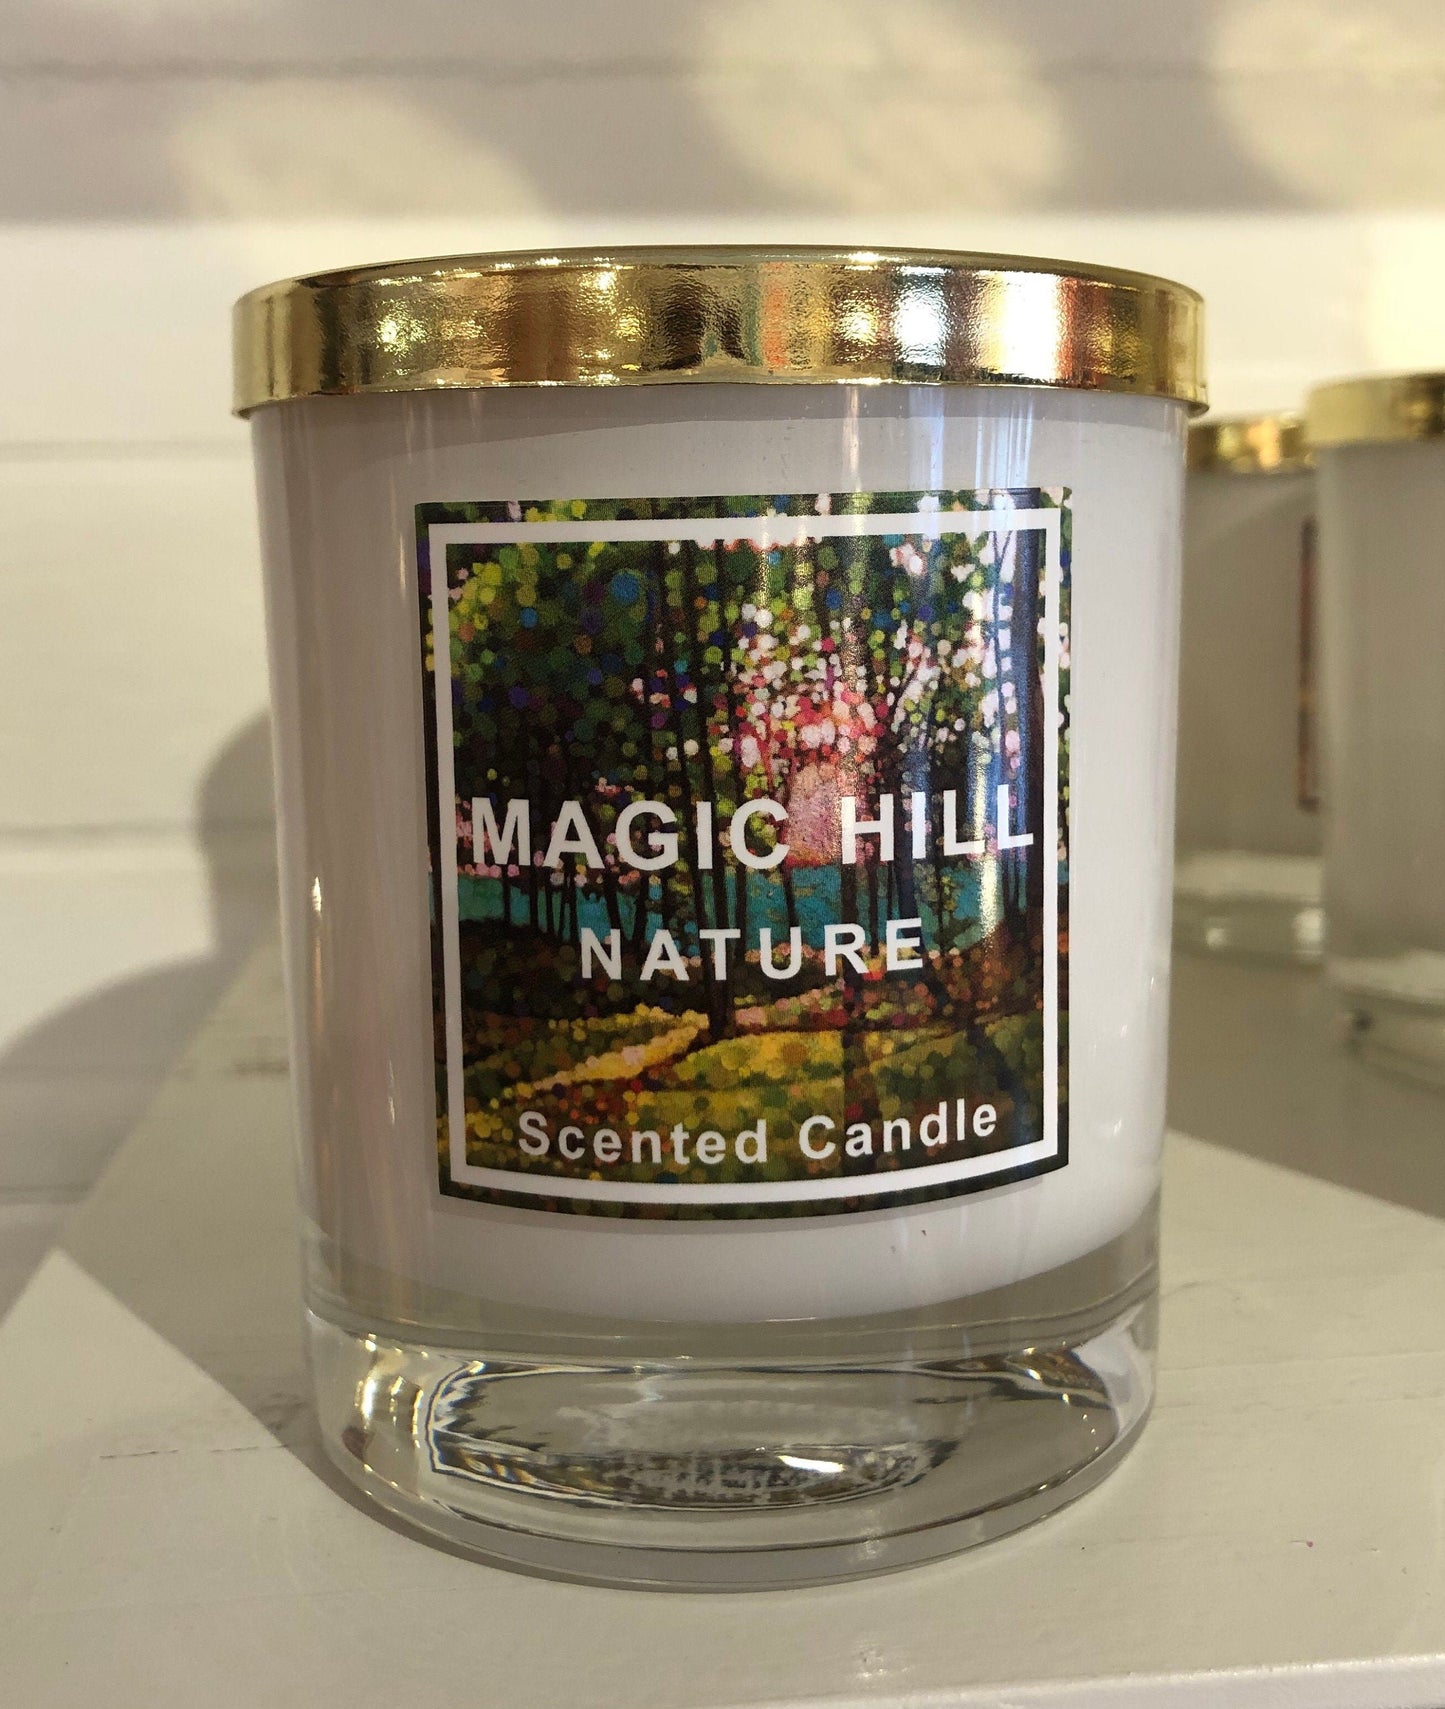 Hand-Poured coconut wax NATURE Handcrafted Scented Coconut Wax Candle